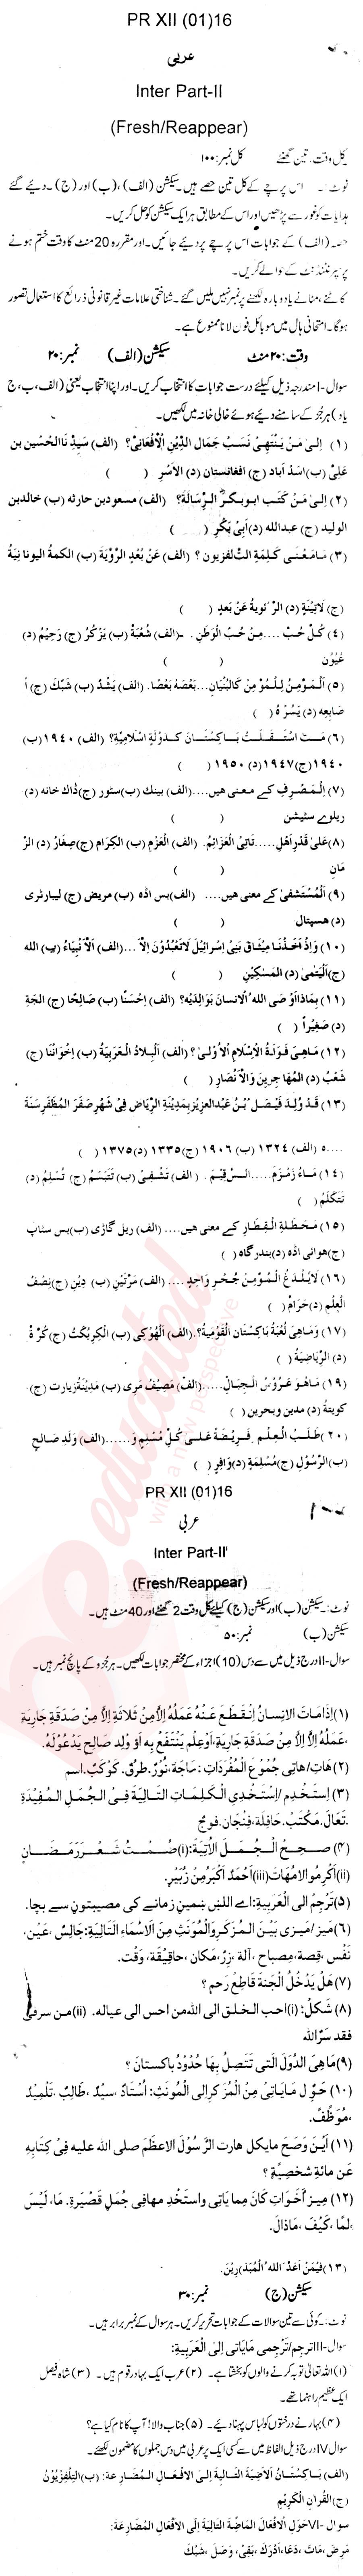 Arabic FA Part 2 Past Paper Group 1 BISE Malakand 2016